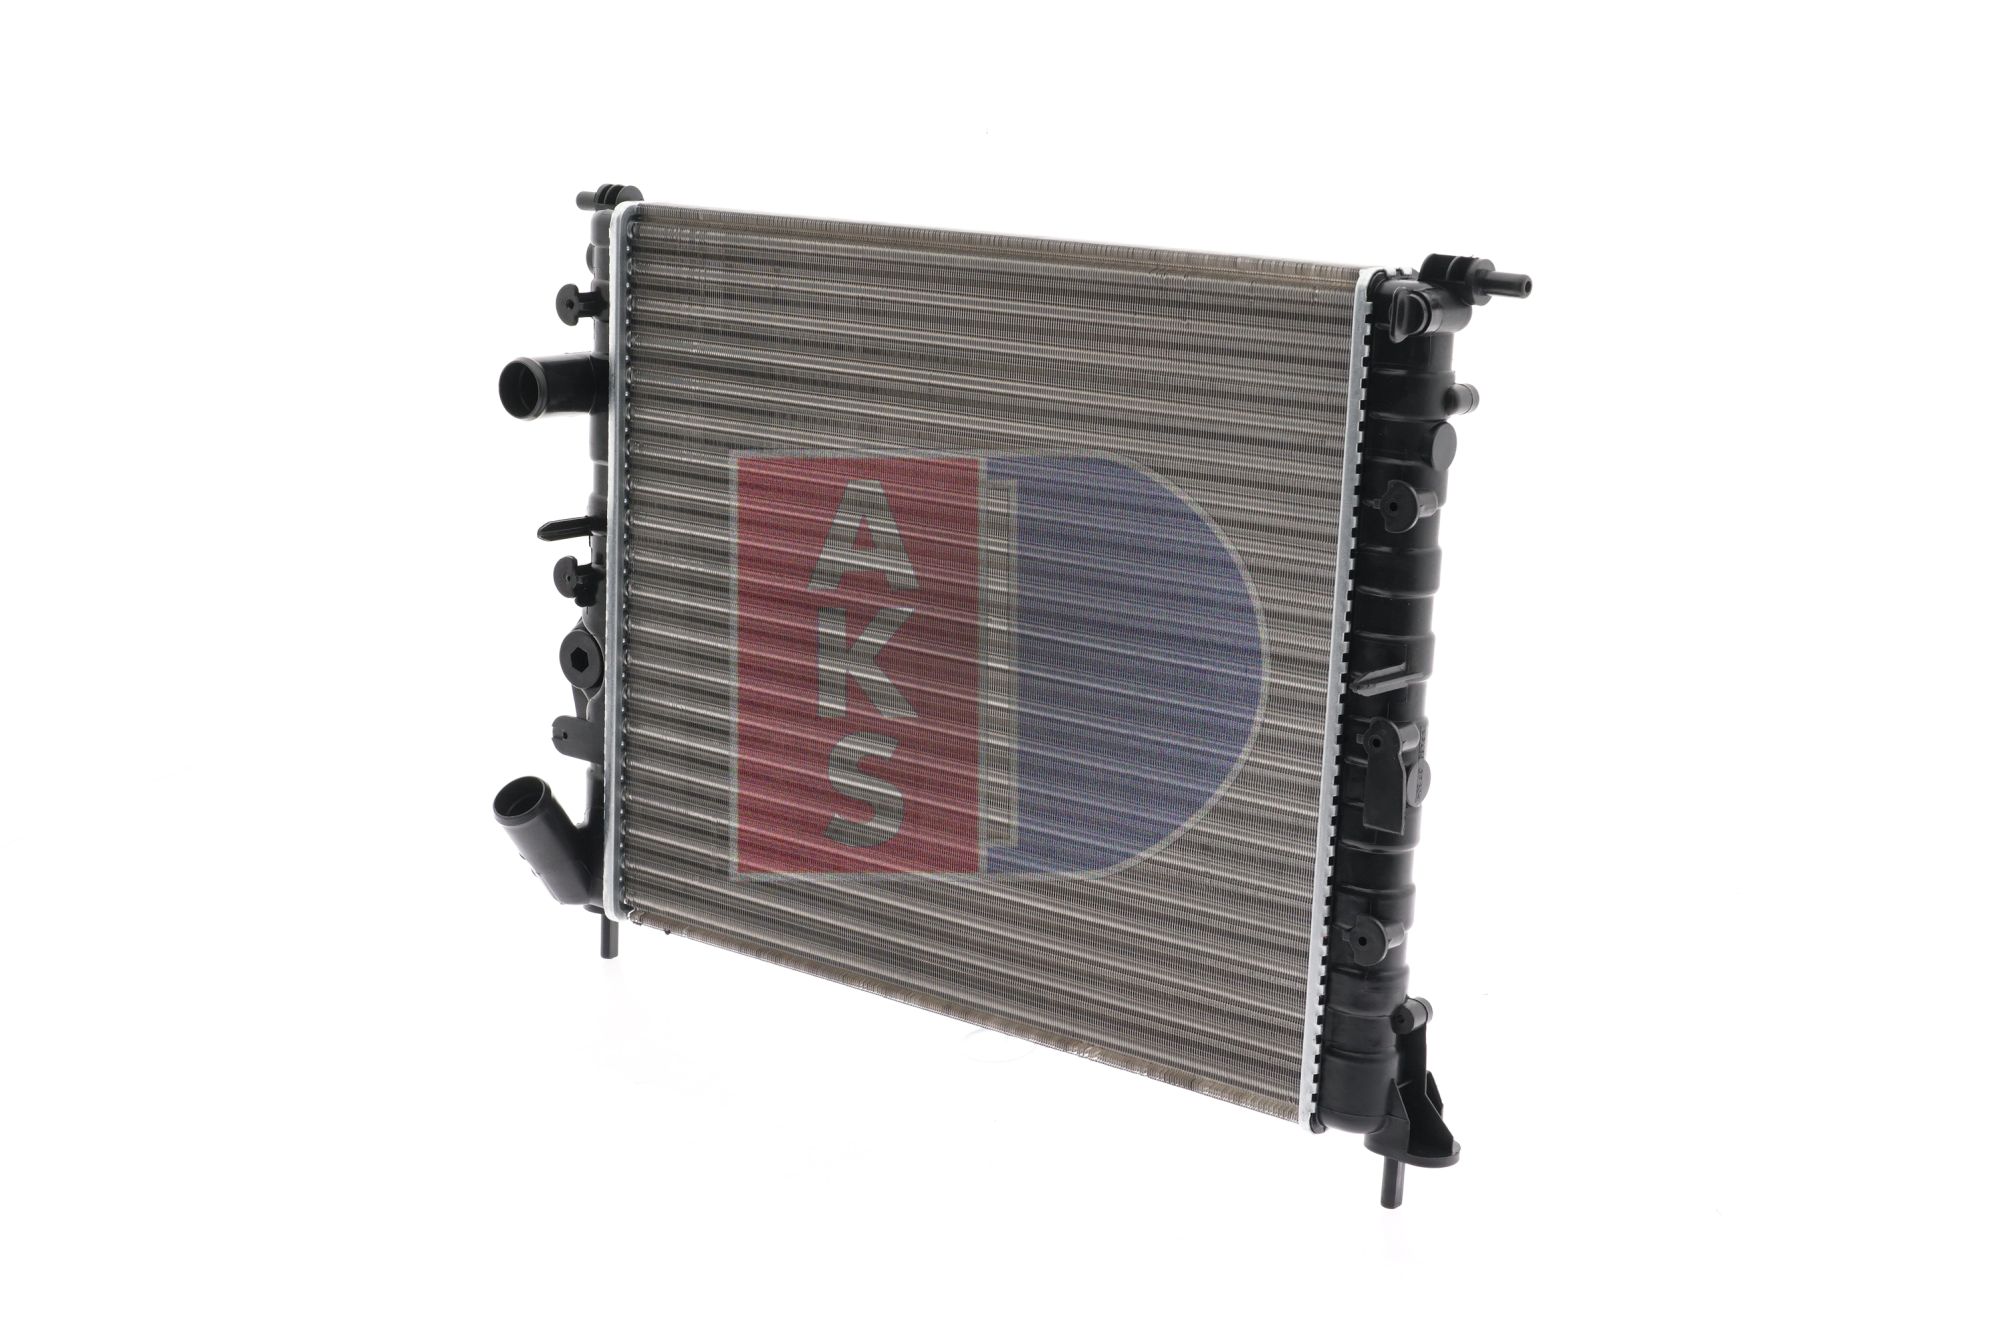 AKS DASIS 180200N Engine radiator 425 x 358 x 16 mm, Mechanically jointed cooling fins